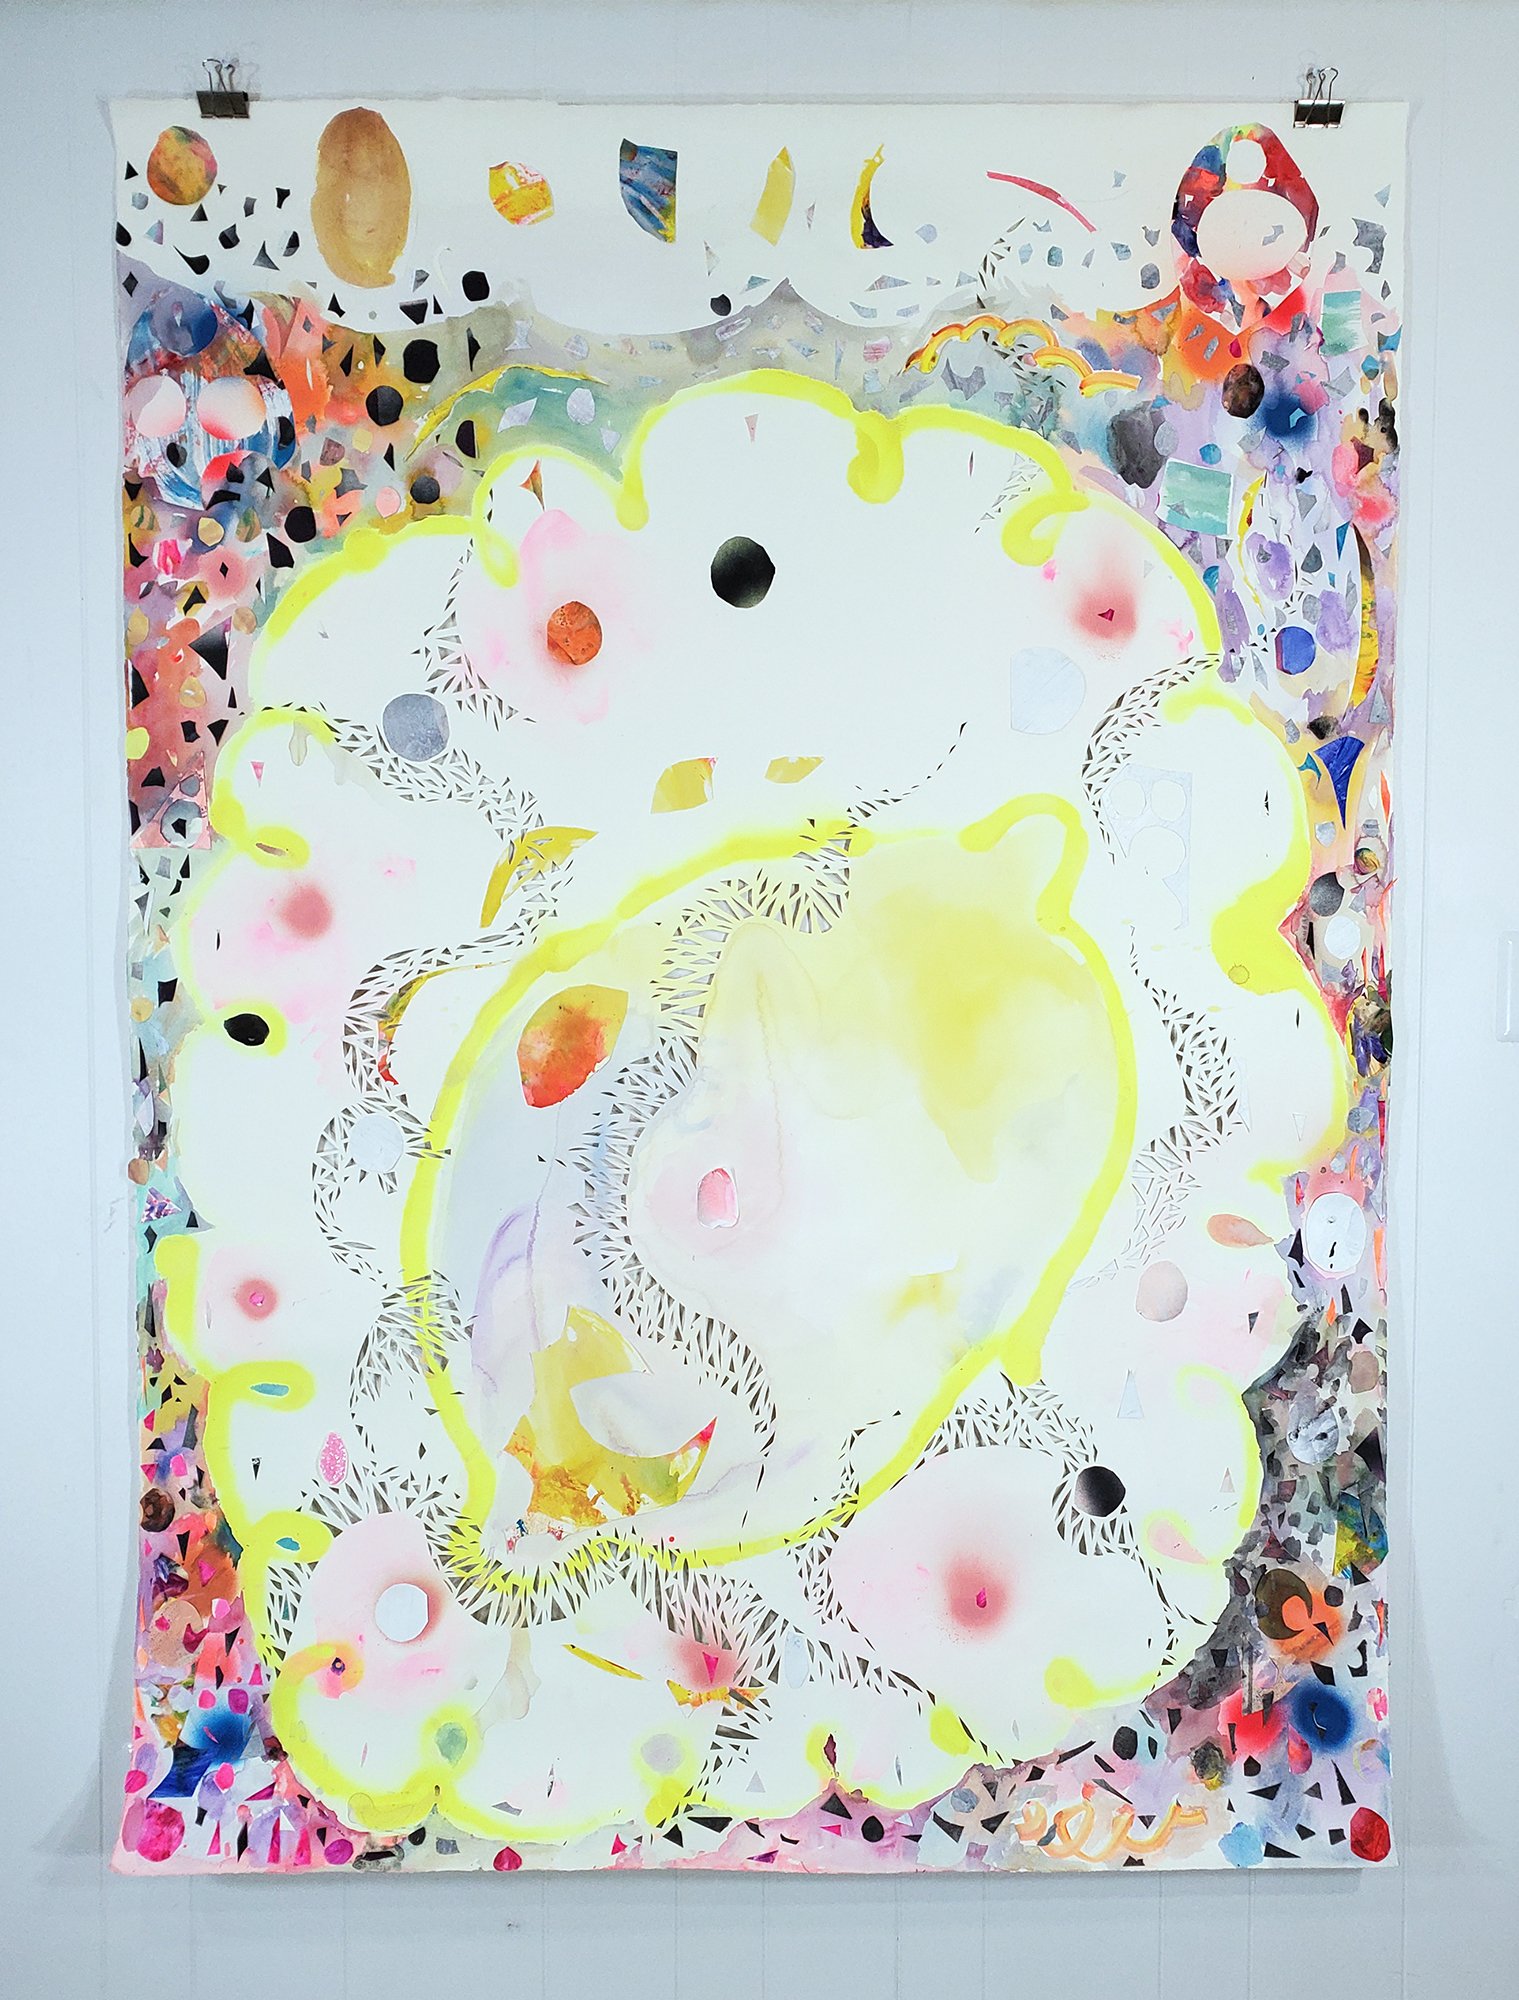   Cosmic Lemon , 2022 Spray paint, acrylic, gouache, flashe, graphite powder, glitter paint and coffee on cut and collaged paper 78 x 55 1/2 inches 